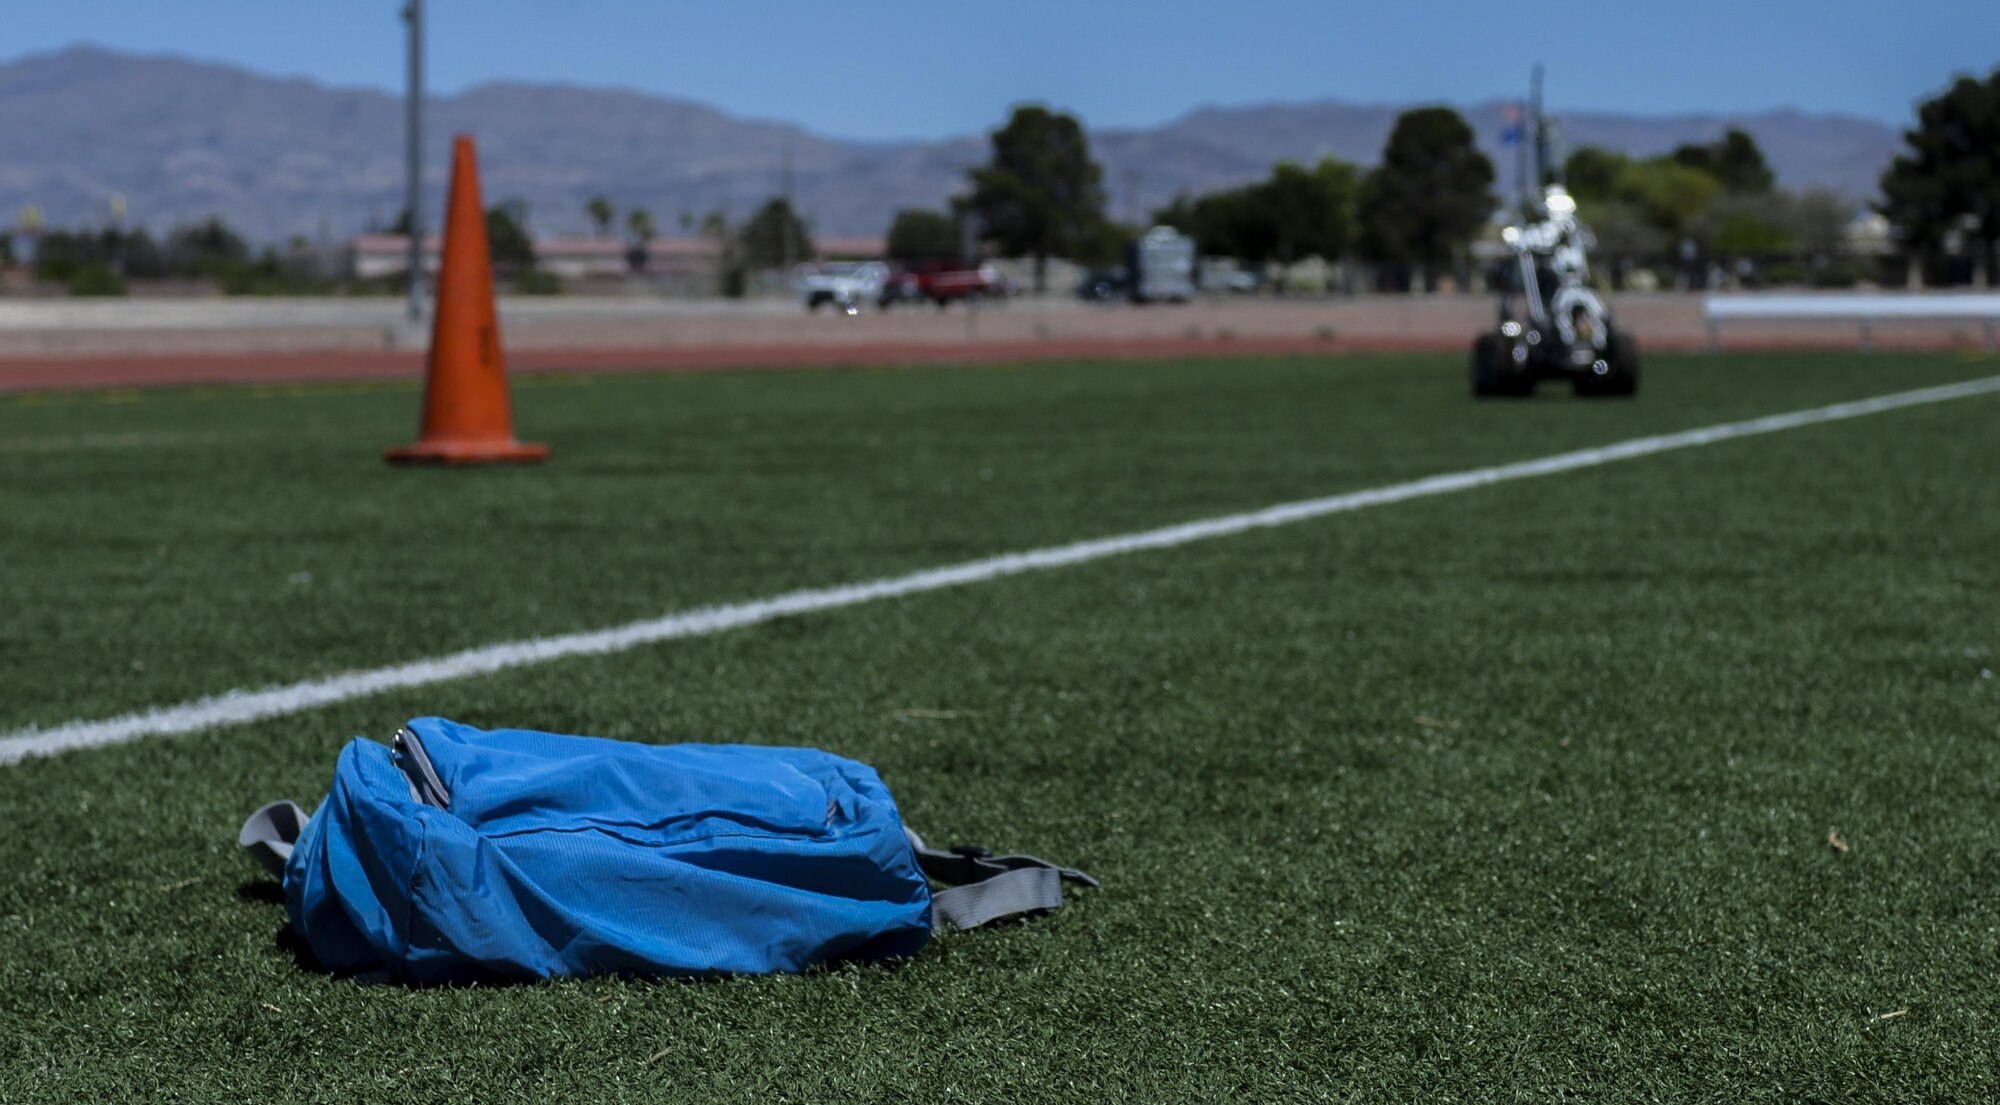 99th Civil Engineer Squadron explosive ordinance disposal uses a robot to survey a suspicious package left at the scene of a simulated active shooter during a base exercise at Nellis Air Force Base, Nev., May 12, 2016. The EOD robot is fitted with camera and a mechanical arm in order to observe areas surrounding a possible explosive before sending in an EOD Tech. (U.S. Air Force photo by Airman 1st Class Kevin Tanenbaum)